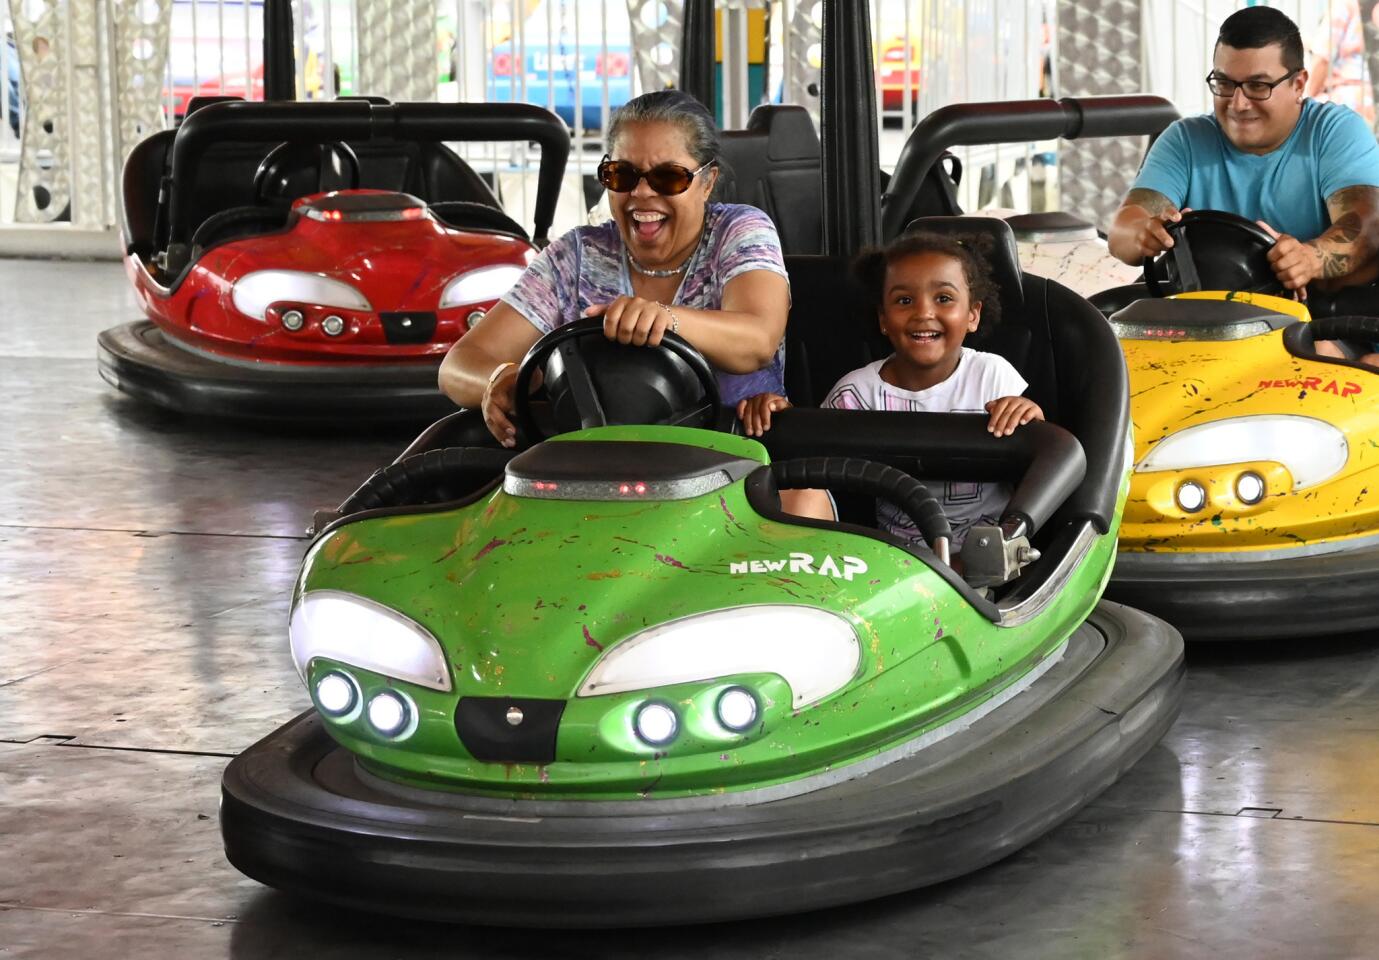 Diane Correia of Owings Mills and her 4-year-old granddaughter Aaliyah enjoy a ride in a bumper car while trying to elude pressure from other cars during the carnival at Reese & Community Volunteer Fire Company on Tuesday, July 16.